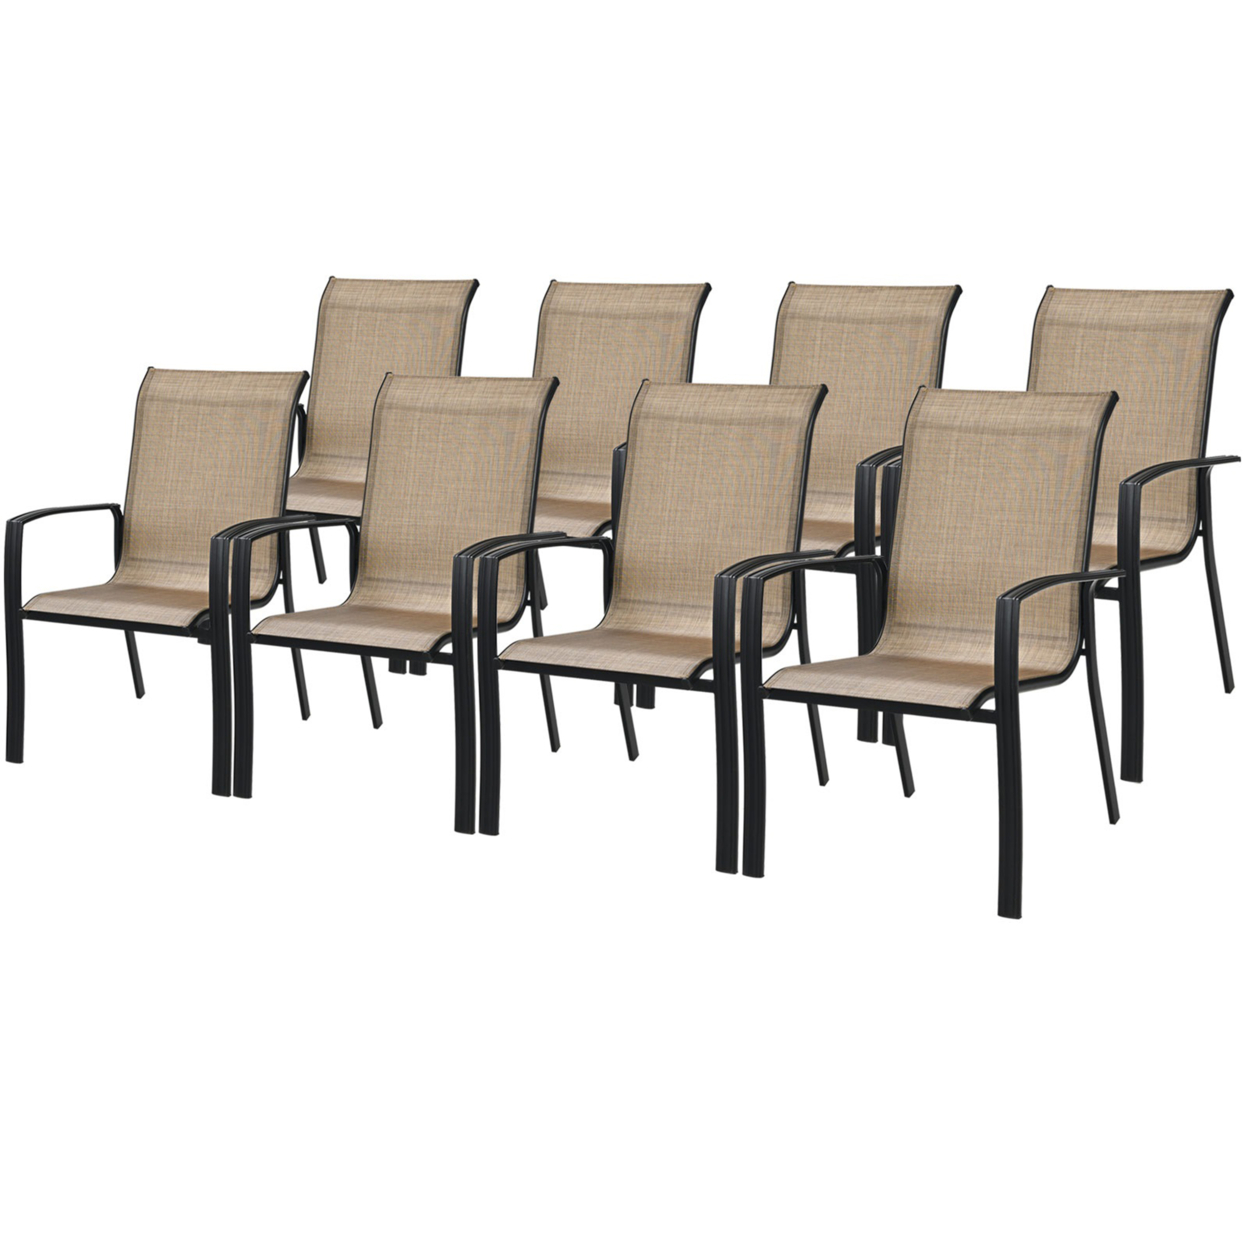 Outdoor Stackable Dining Chair Patio Armchair W/ Breathable Fabric - Brown, 8 Pcs